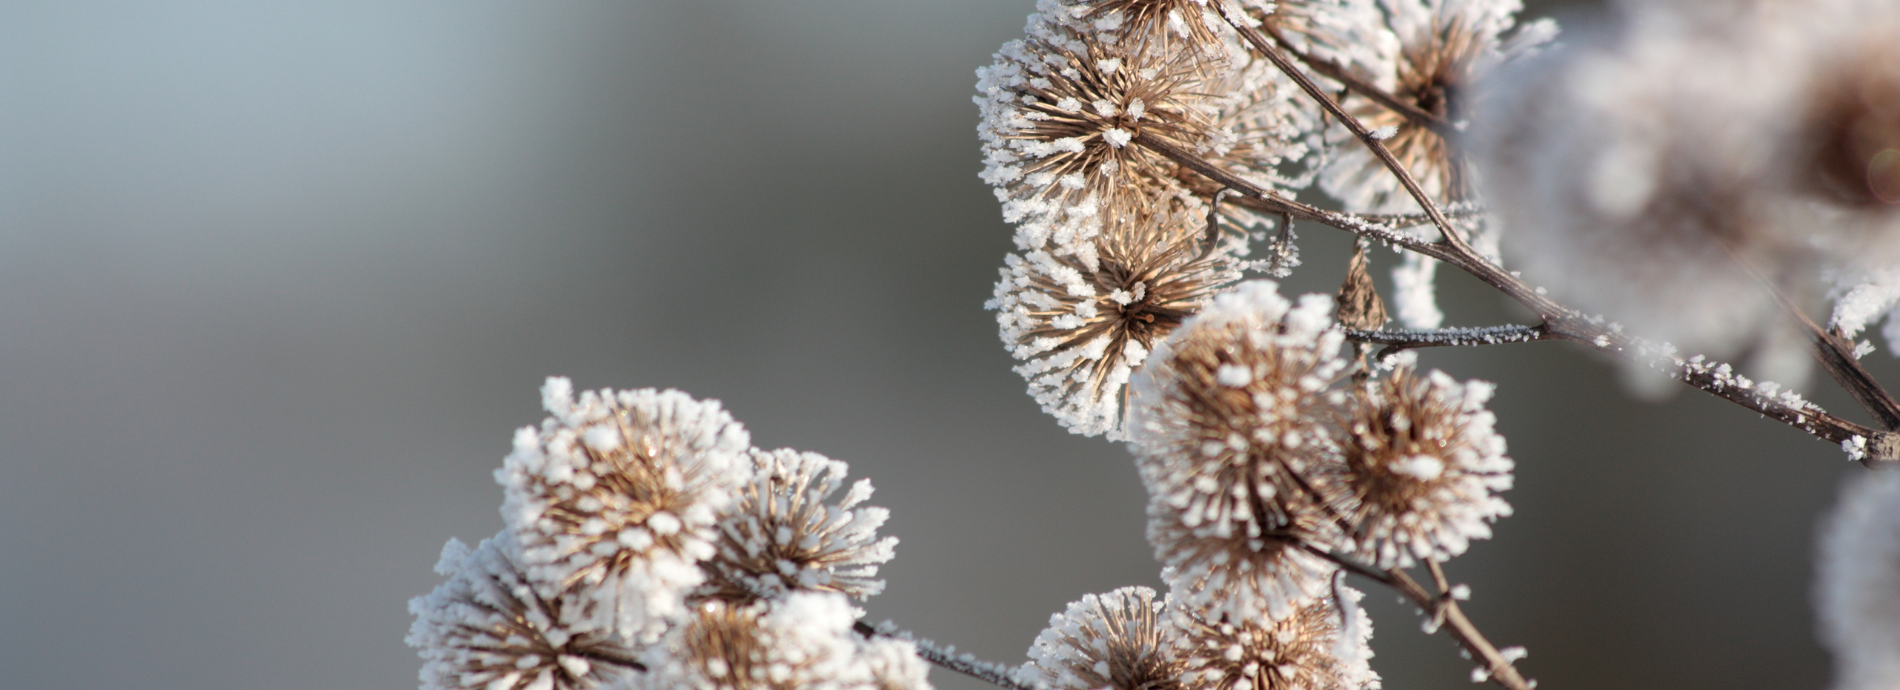 burs covered in a blanket of snow 